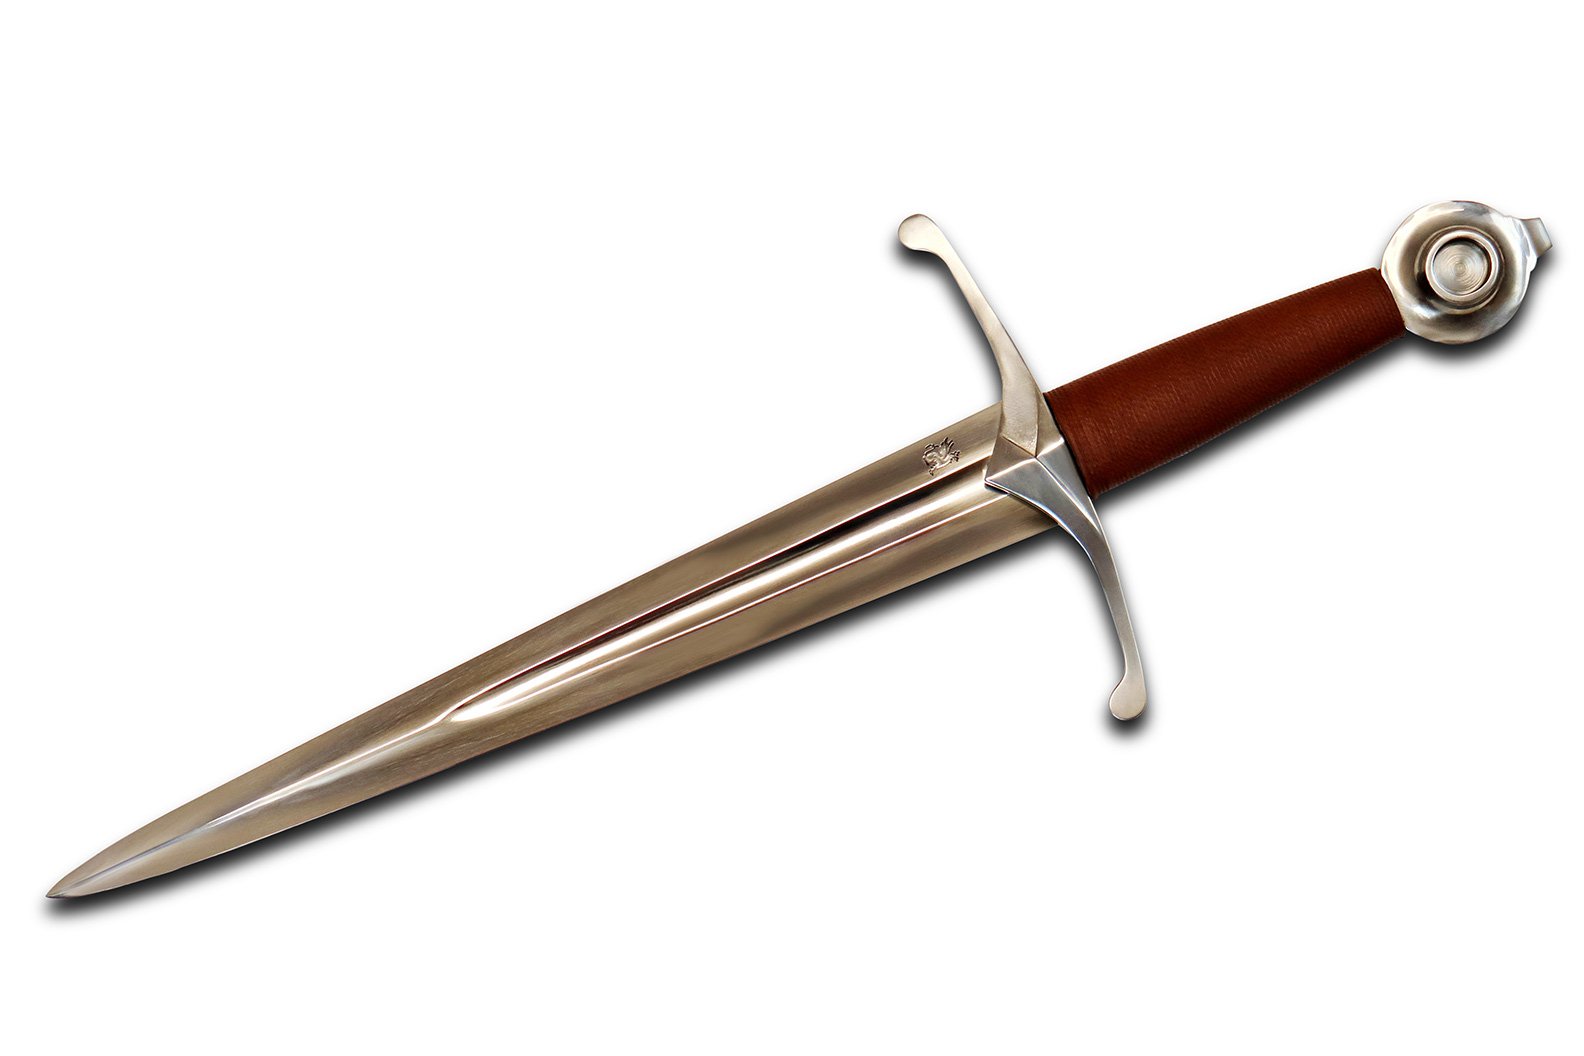 The Squire Medieval Dagger